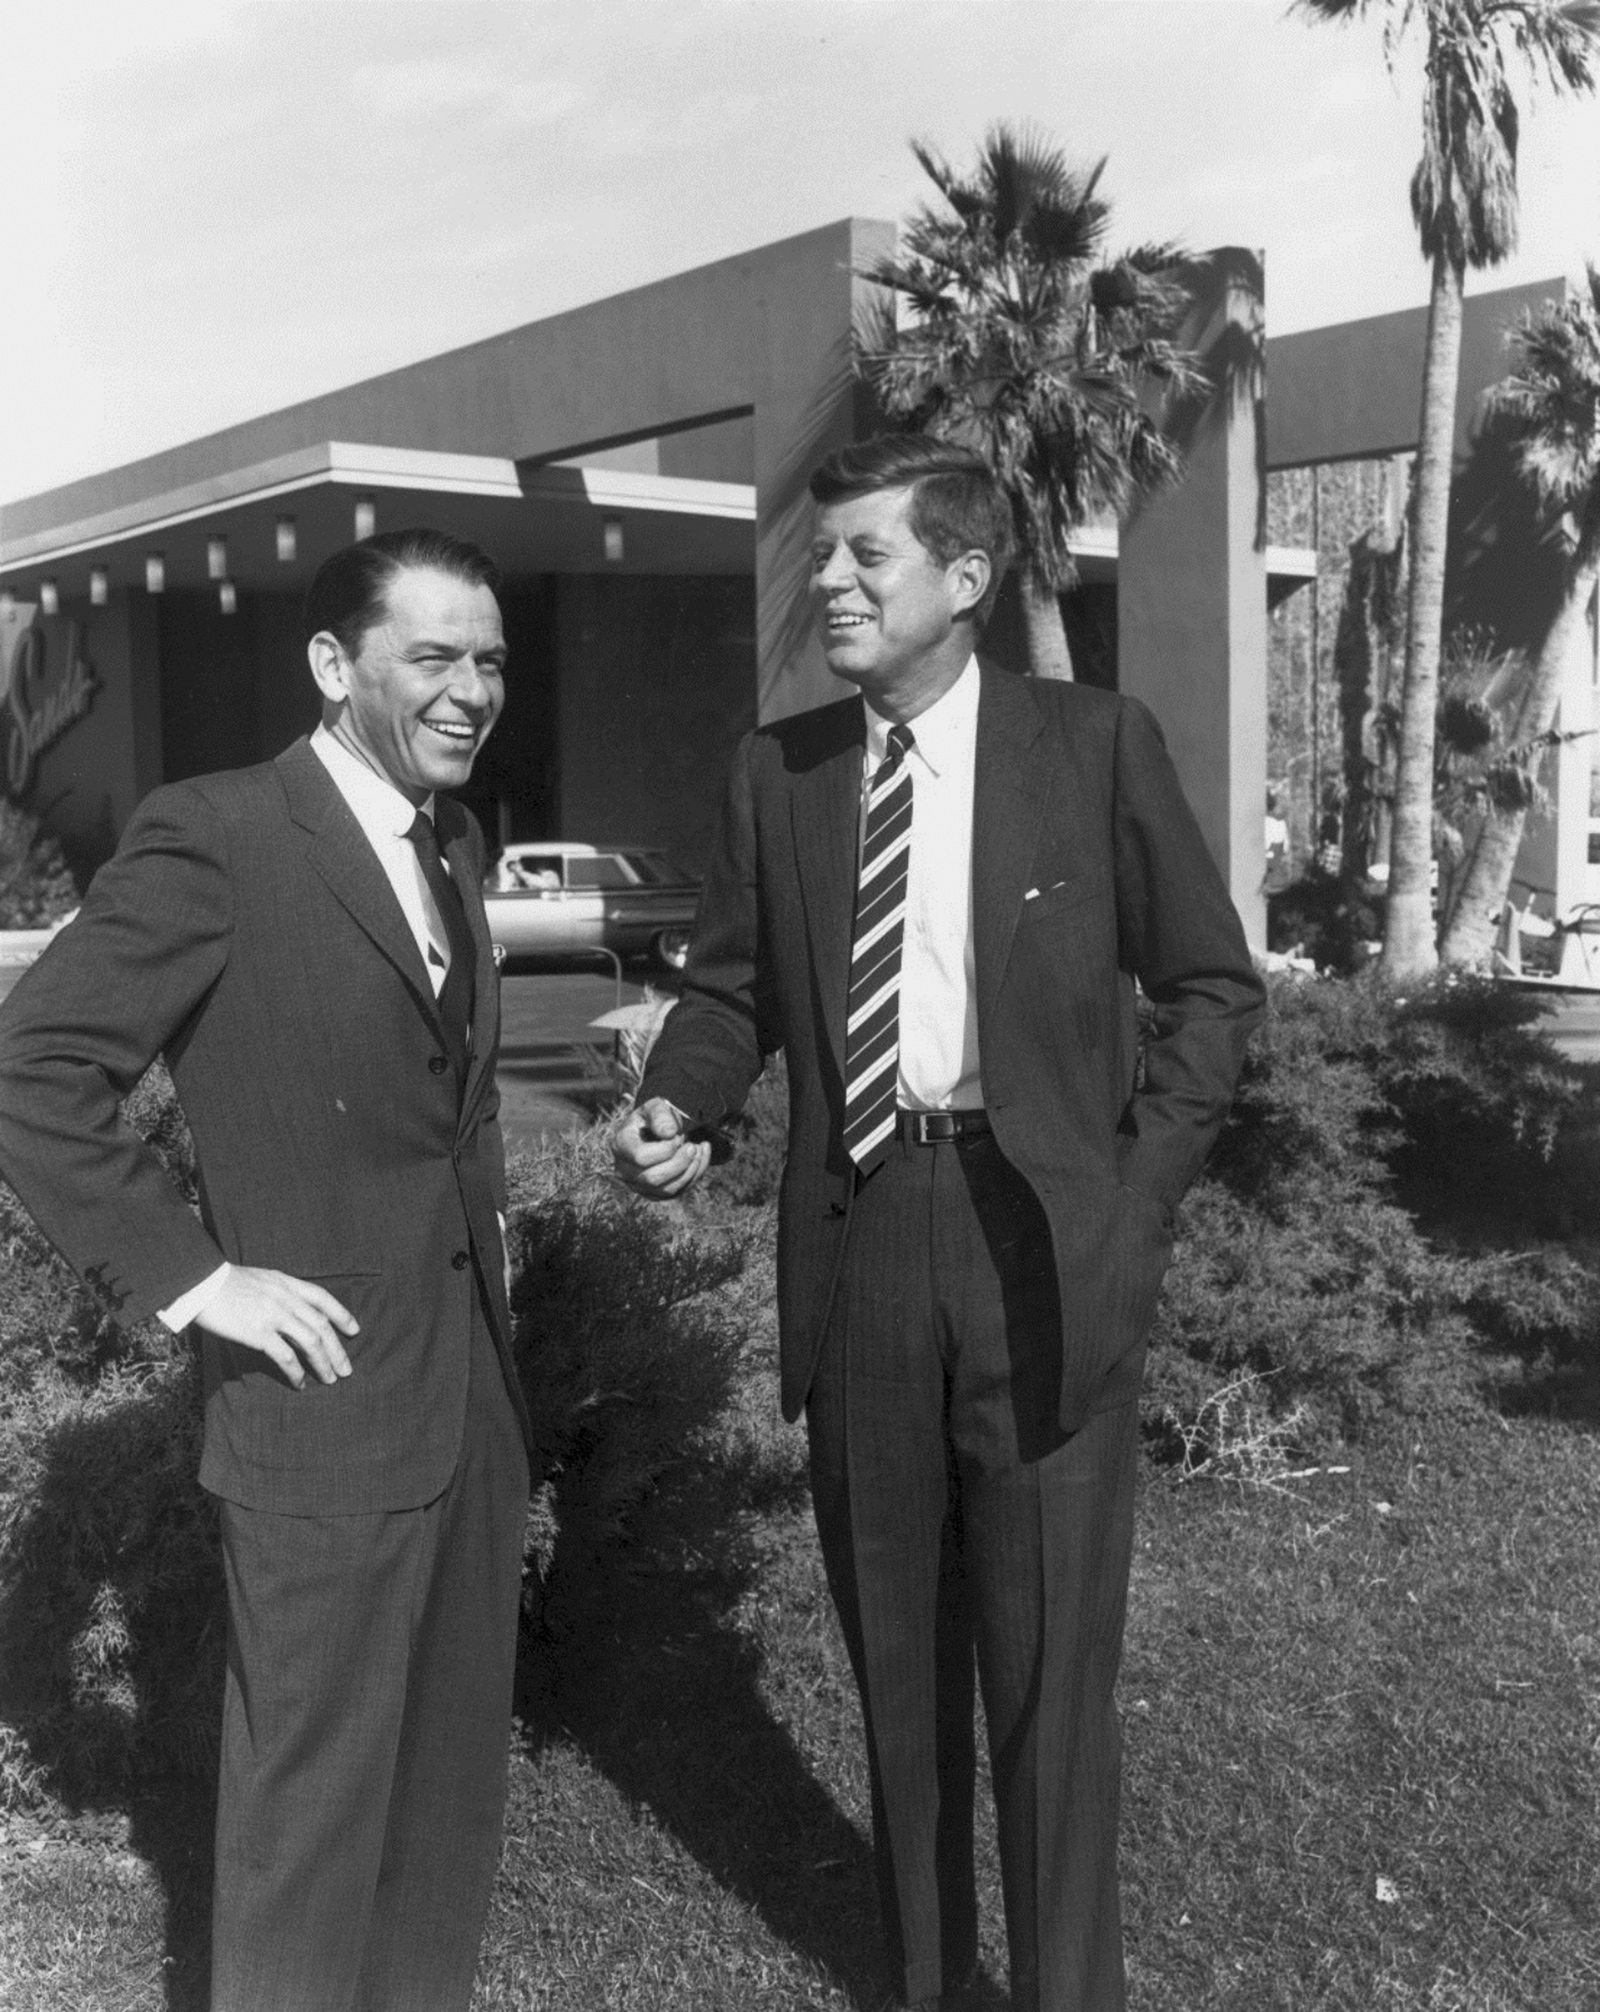 Frank Sinatra and John F. Kennedy at the Sands Hotel and Casino, Las Vegas, February 1960